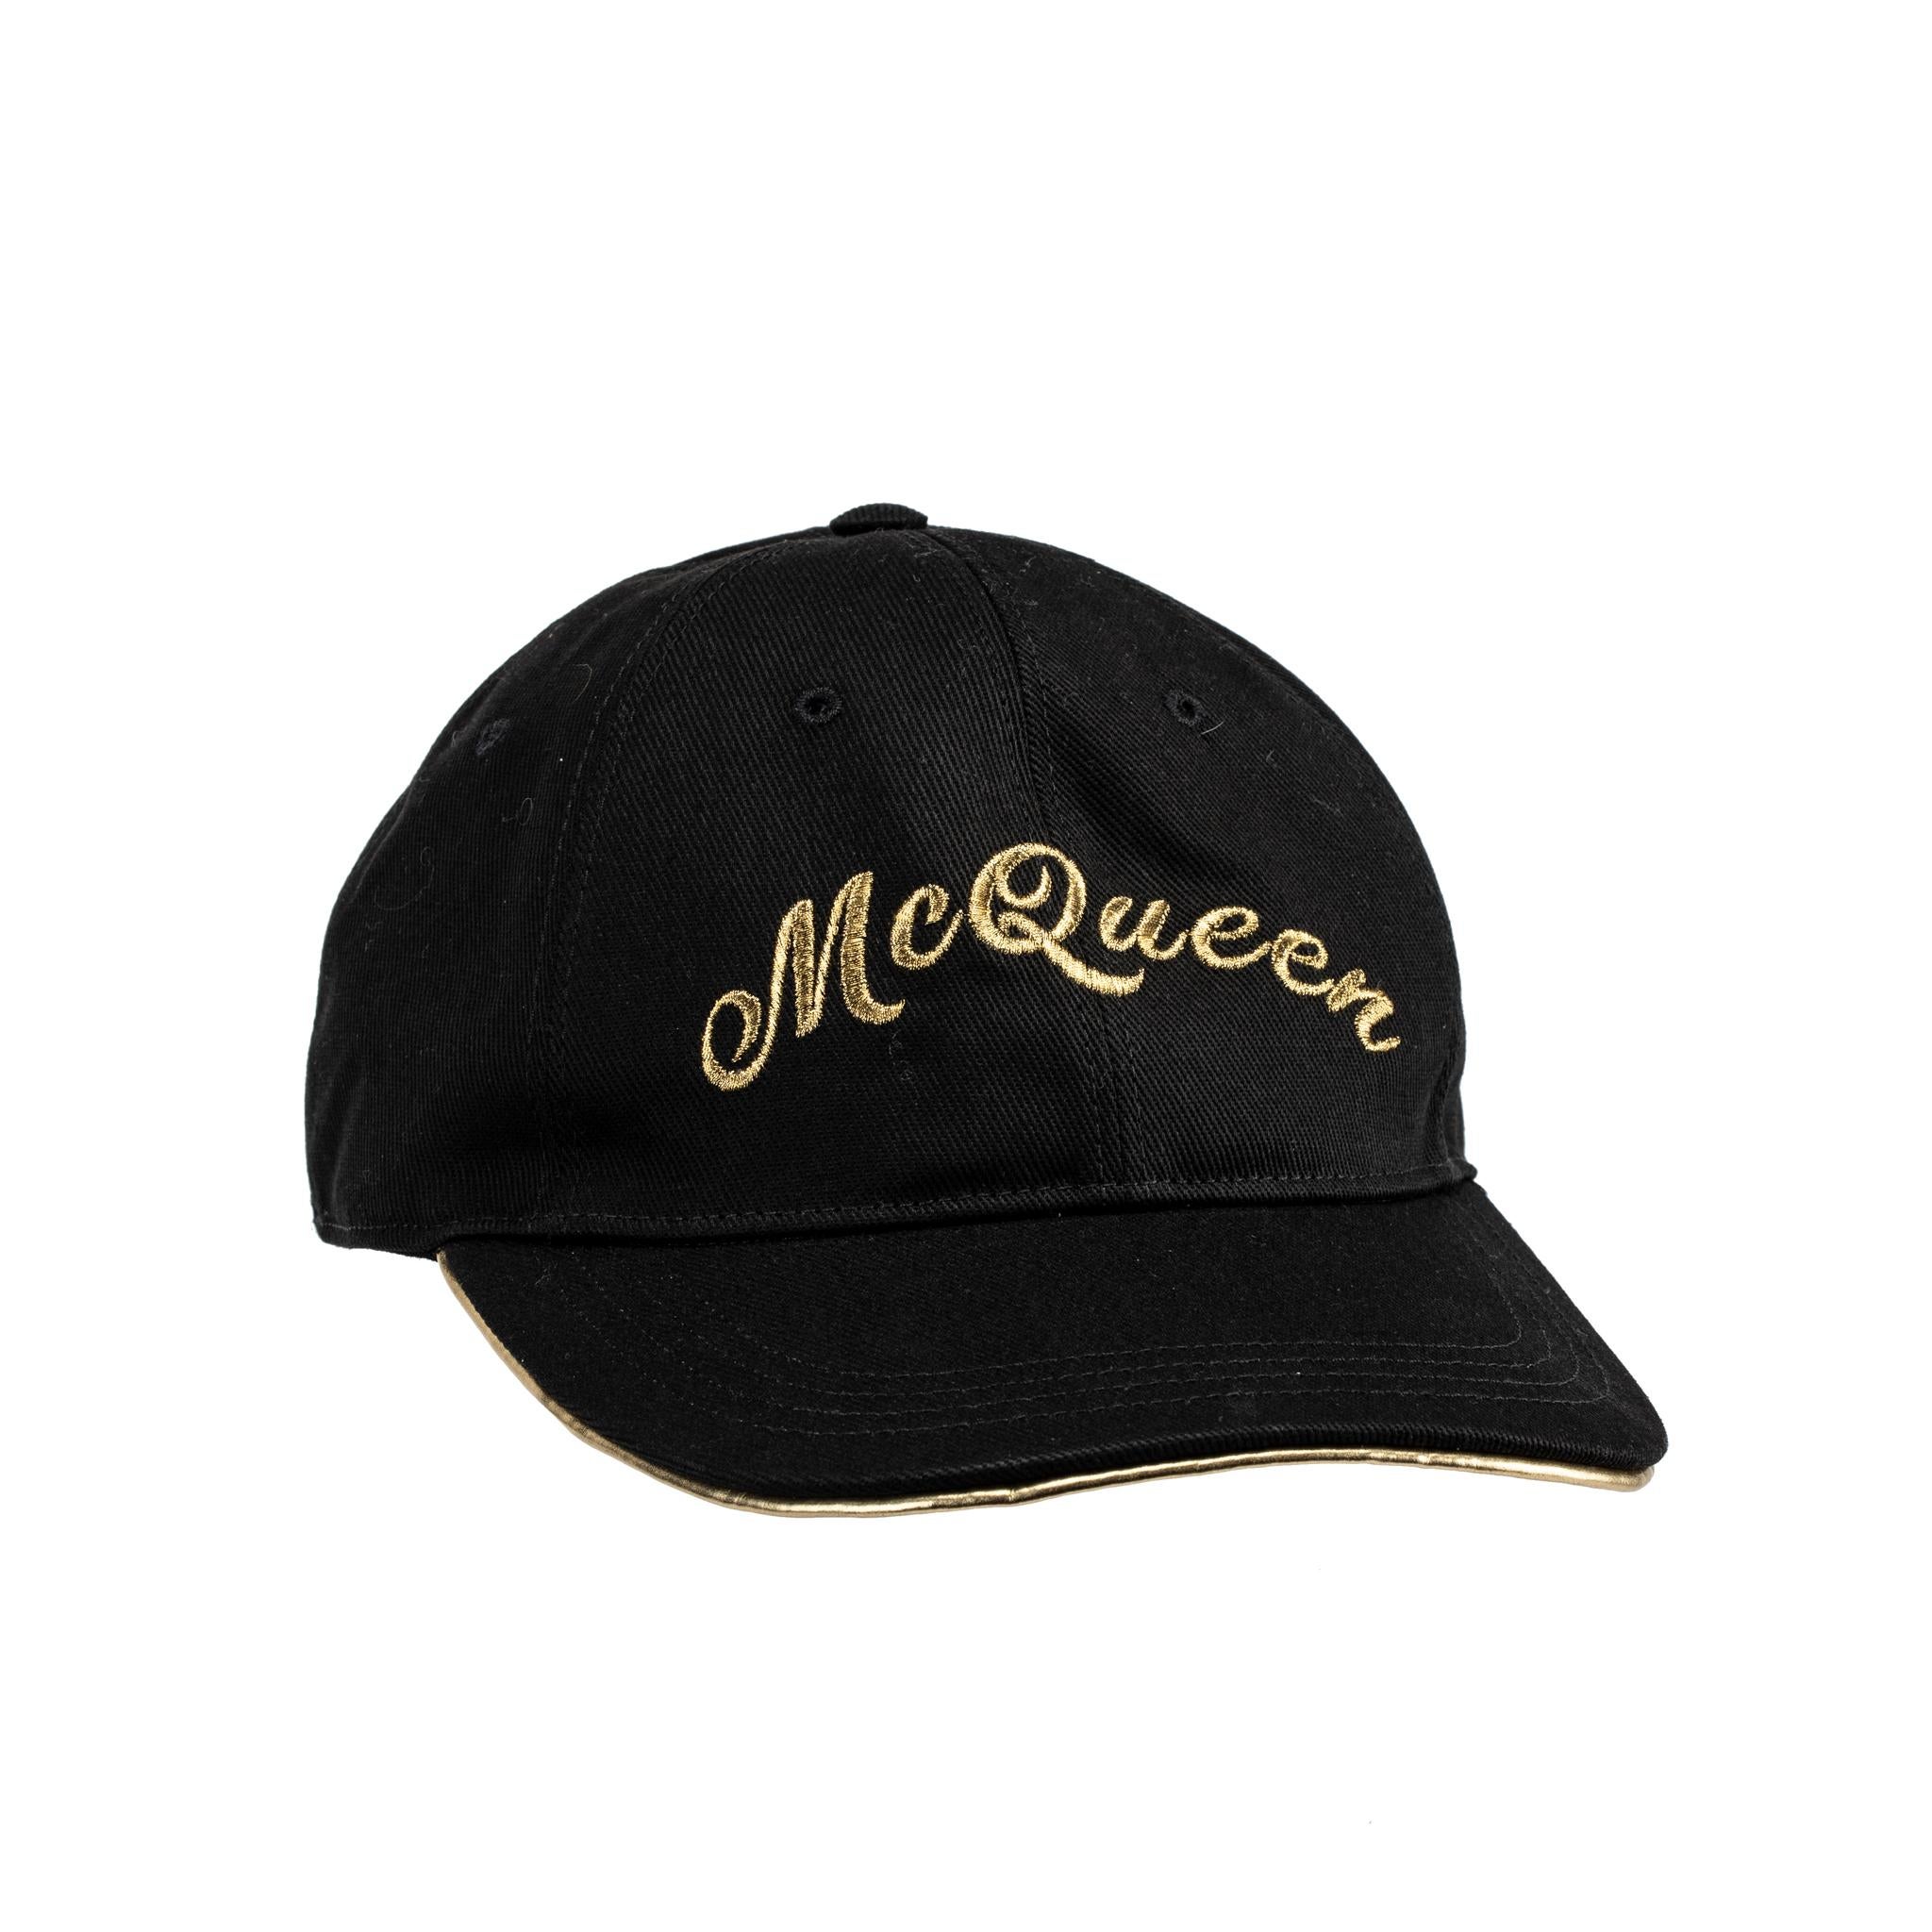 Alexander McQueen Embroidered Cap Black & Gold For Sale 2